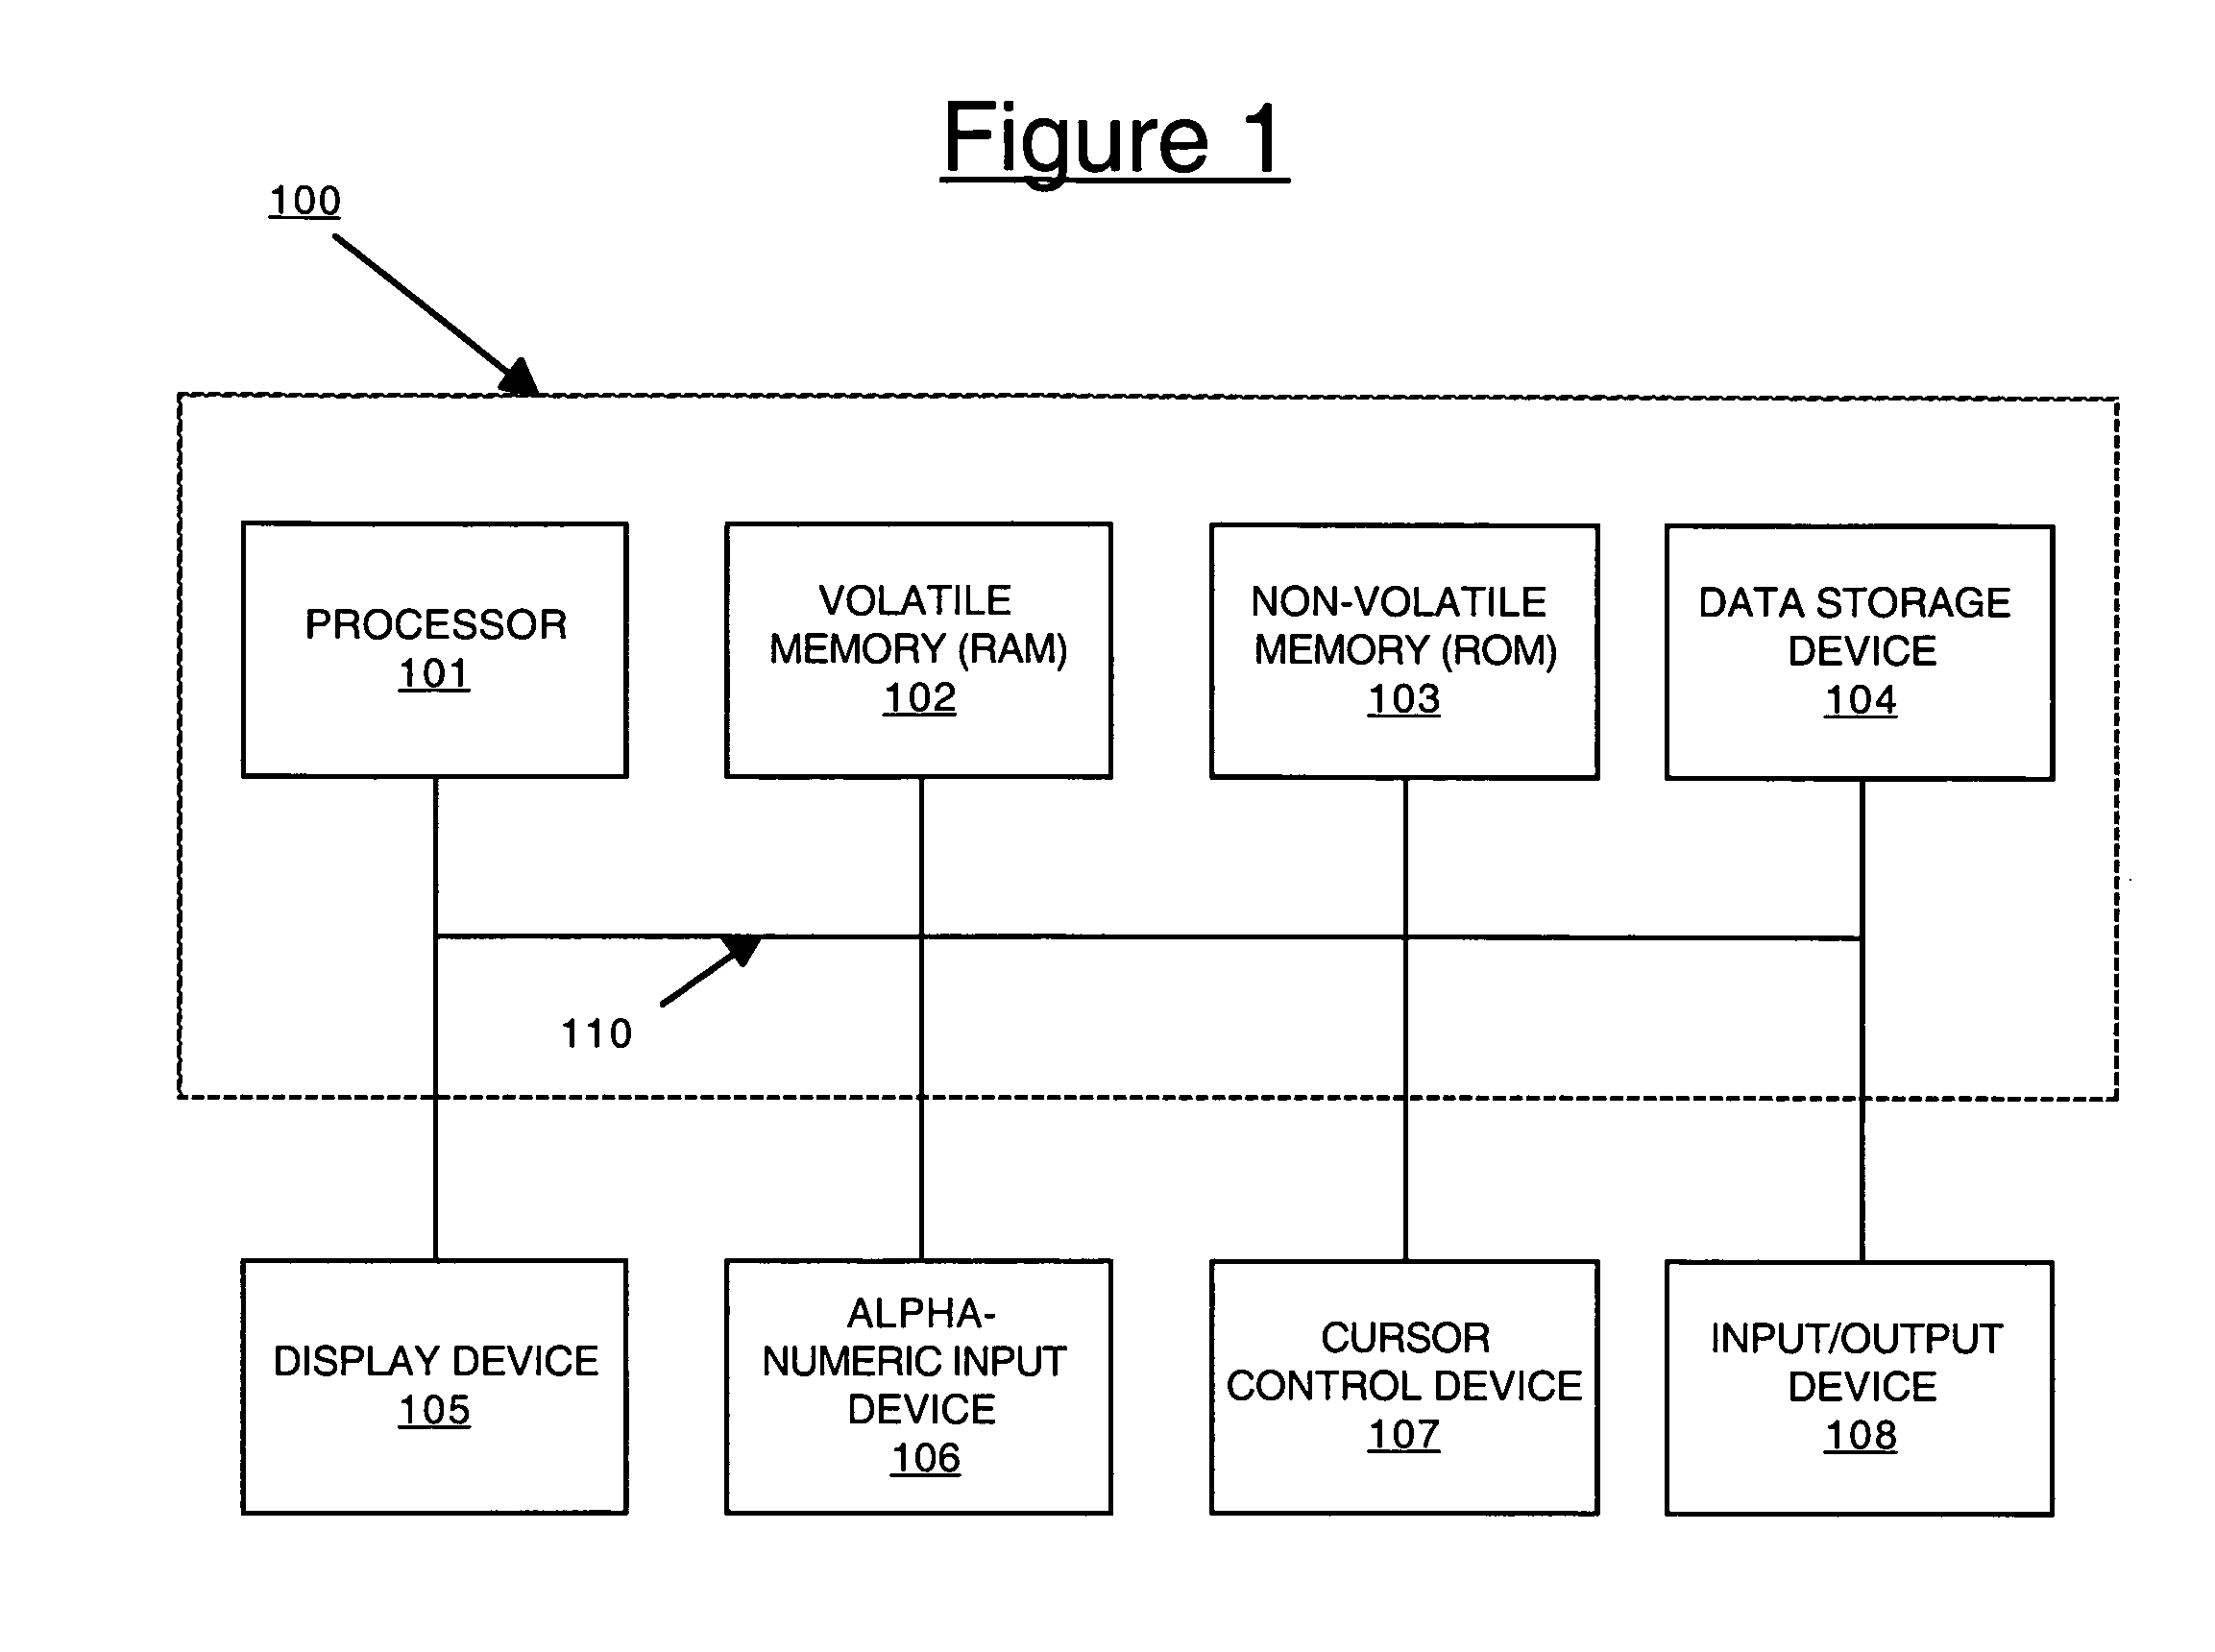 Method for generating a simulated network using a graphical user interface